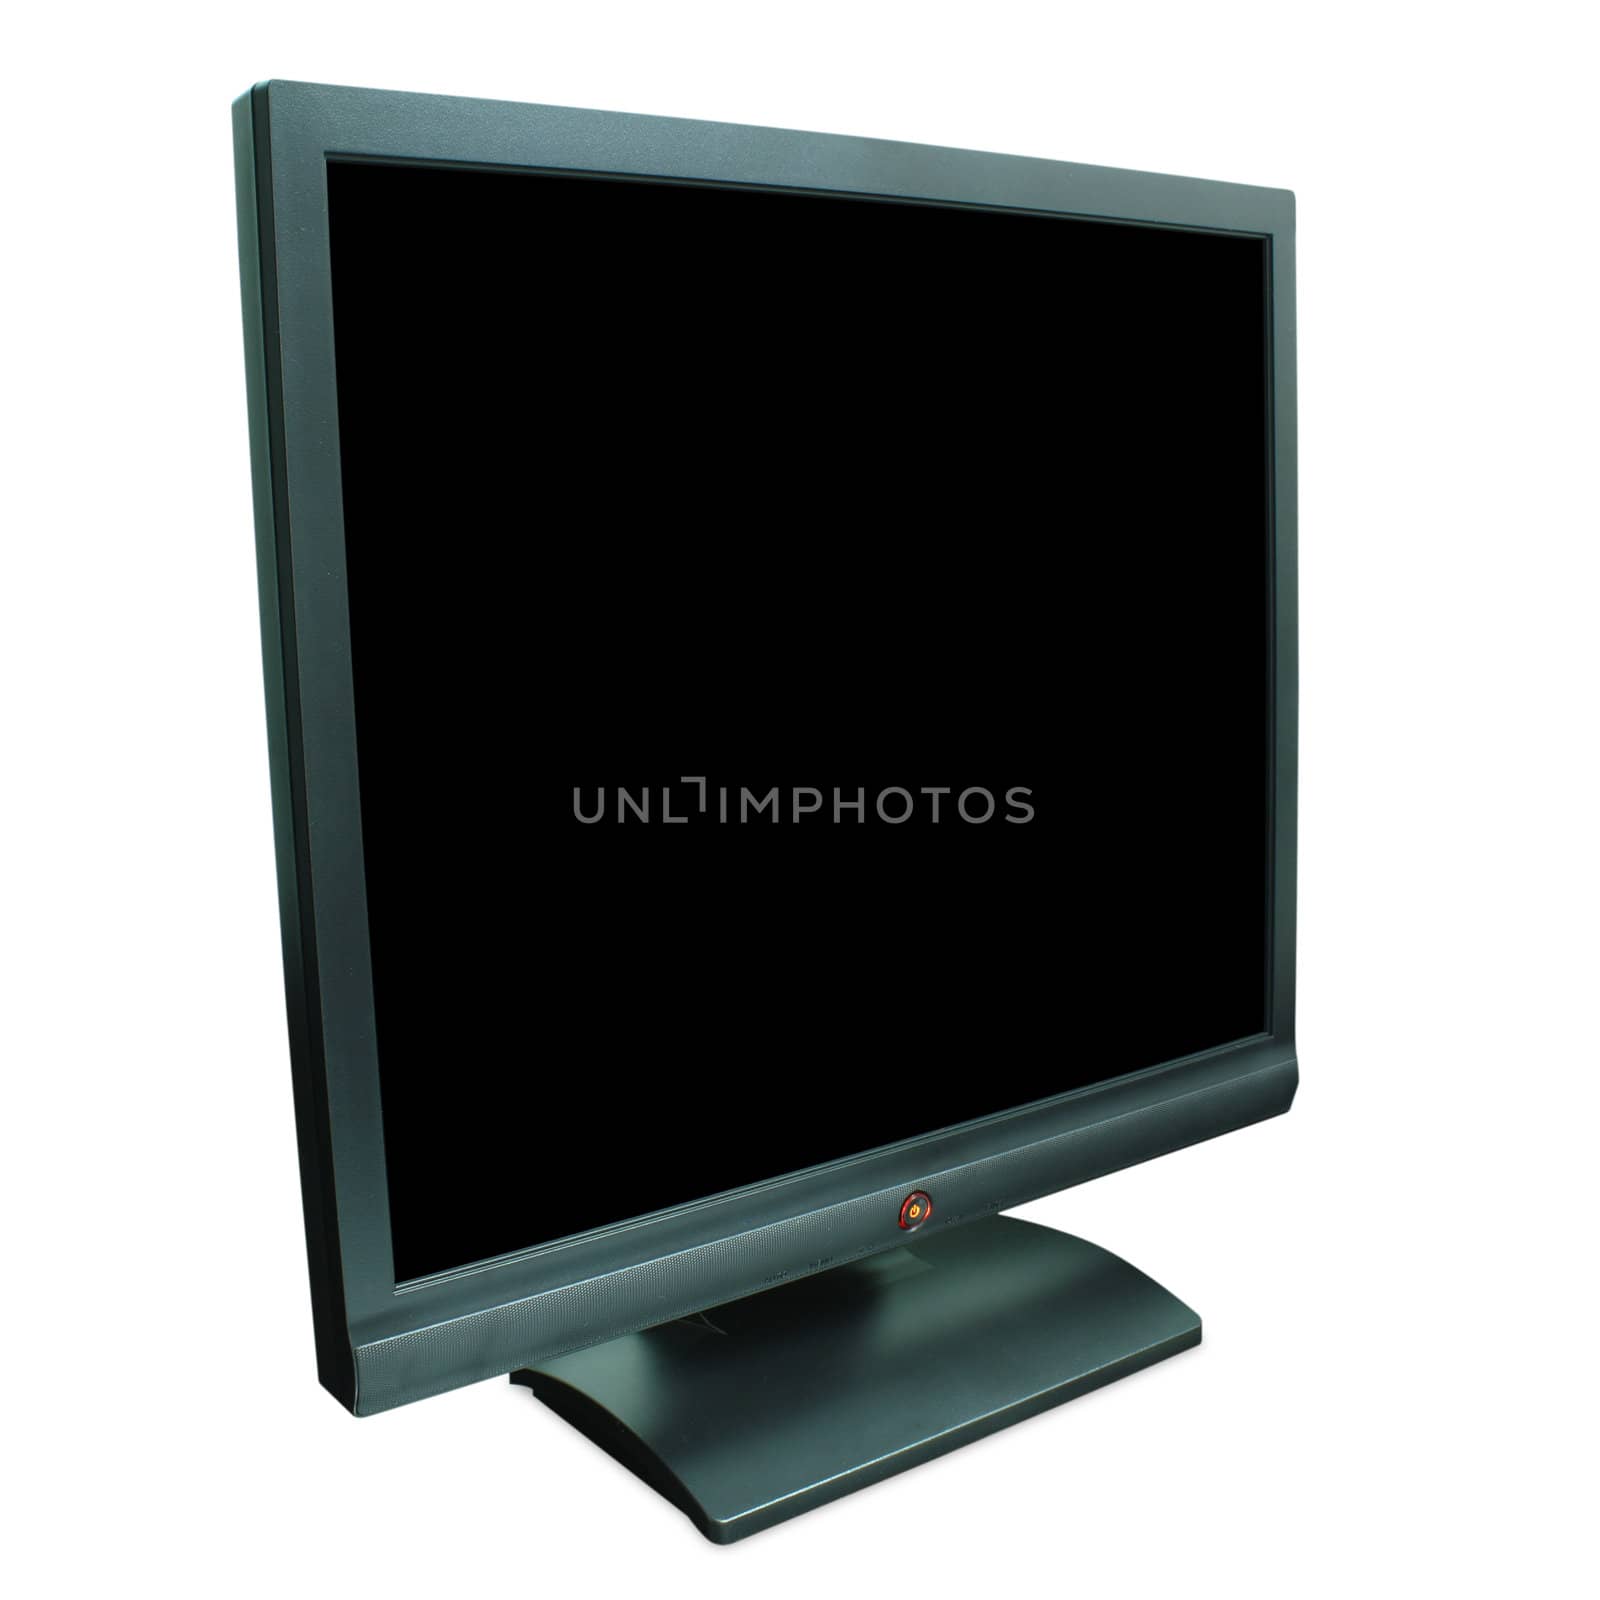 Computer monitor in black over a black background